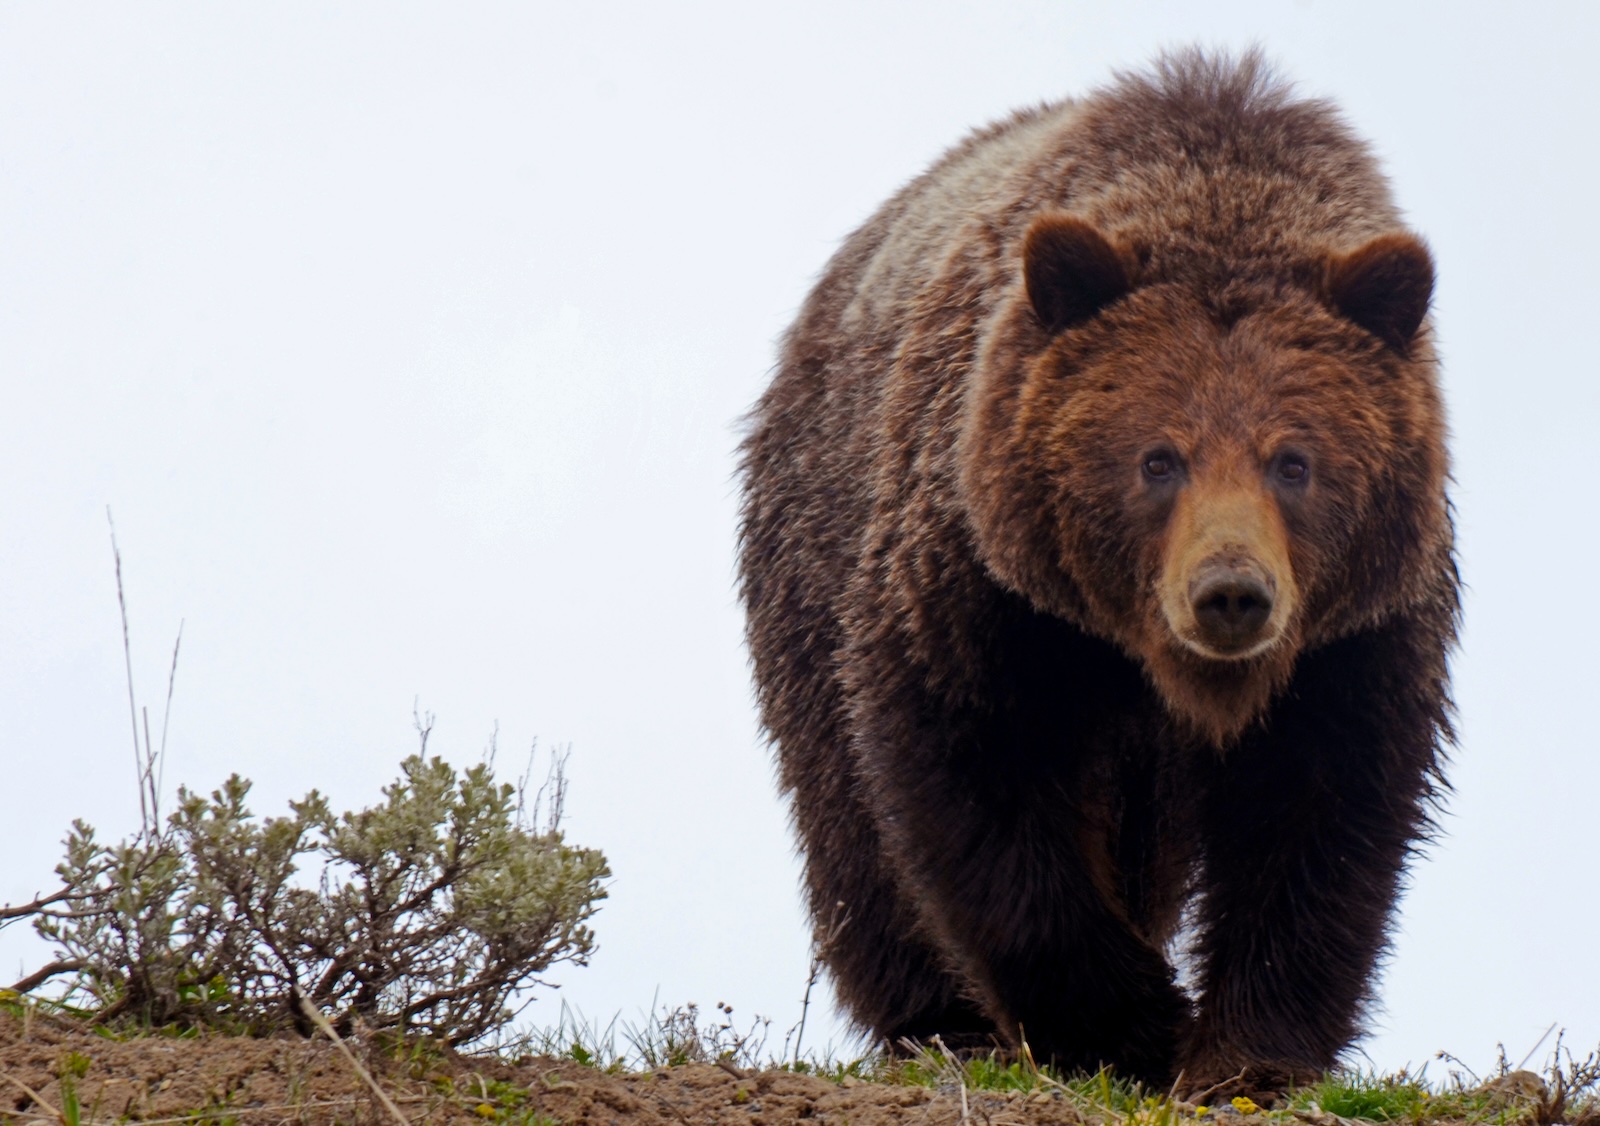 A young grizzly bear fresh out of hibernation. Image credit: © J3nnisme | Dreamstime